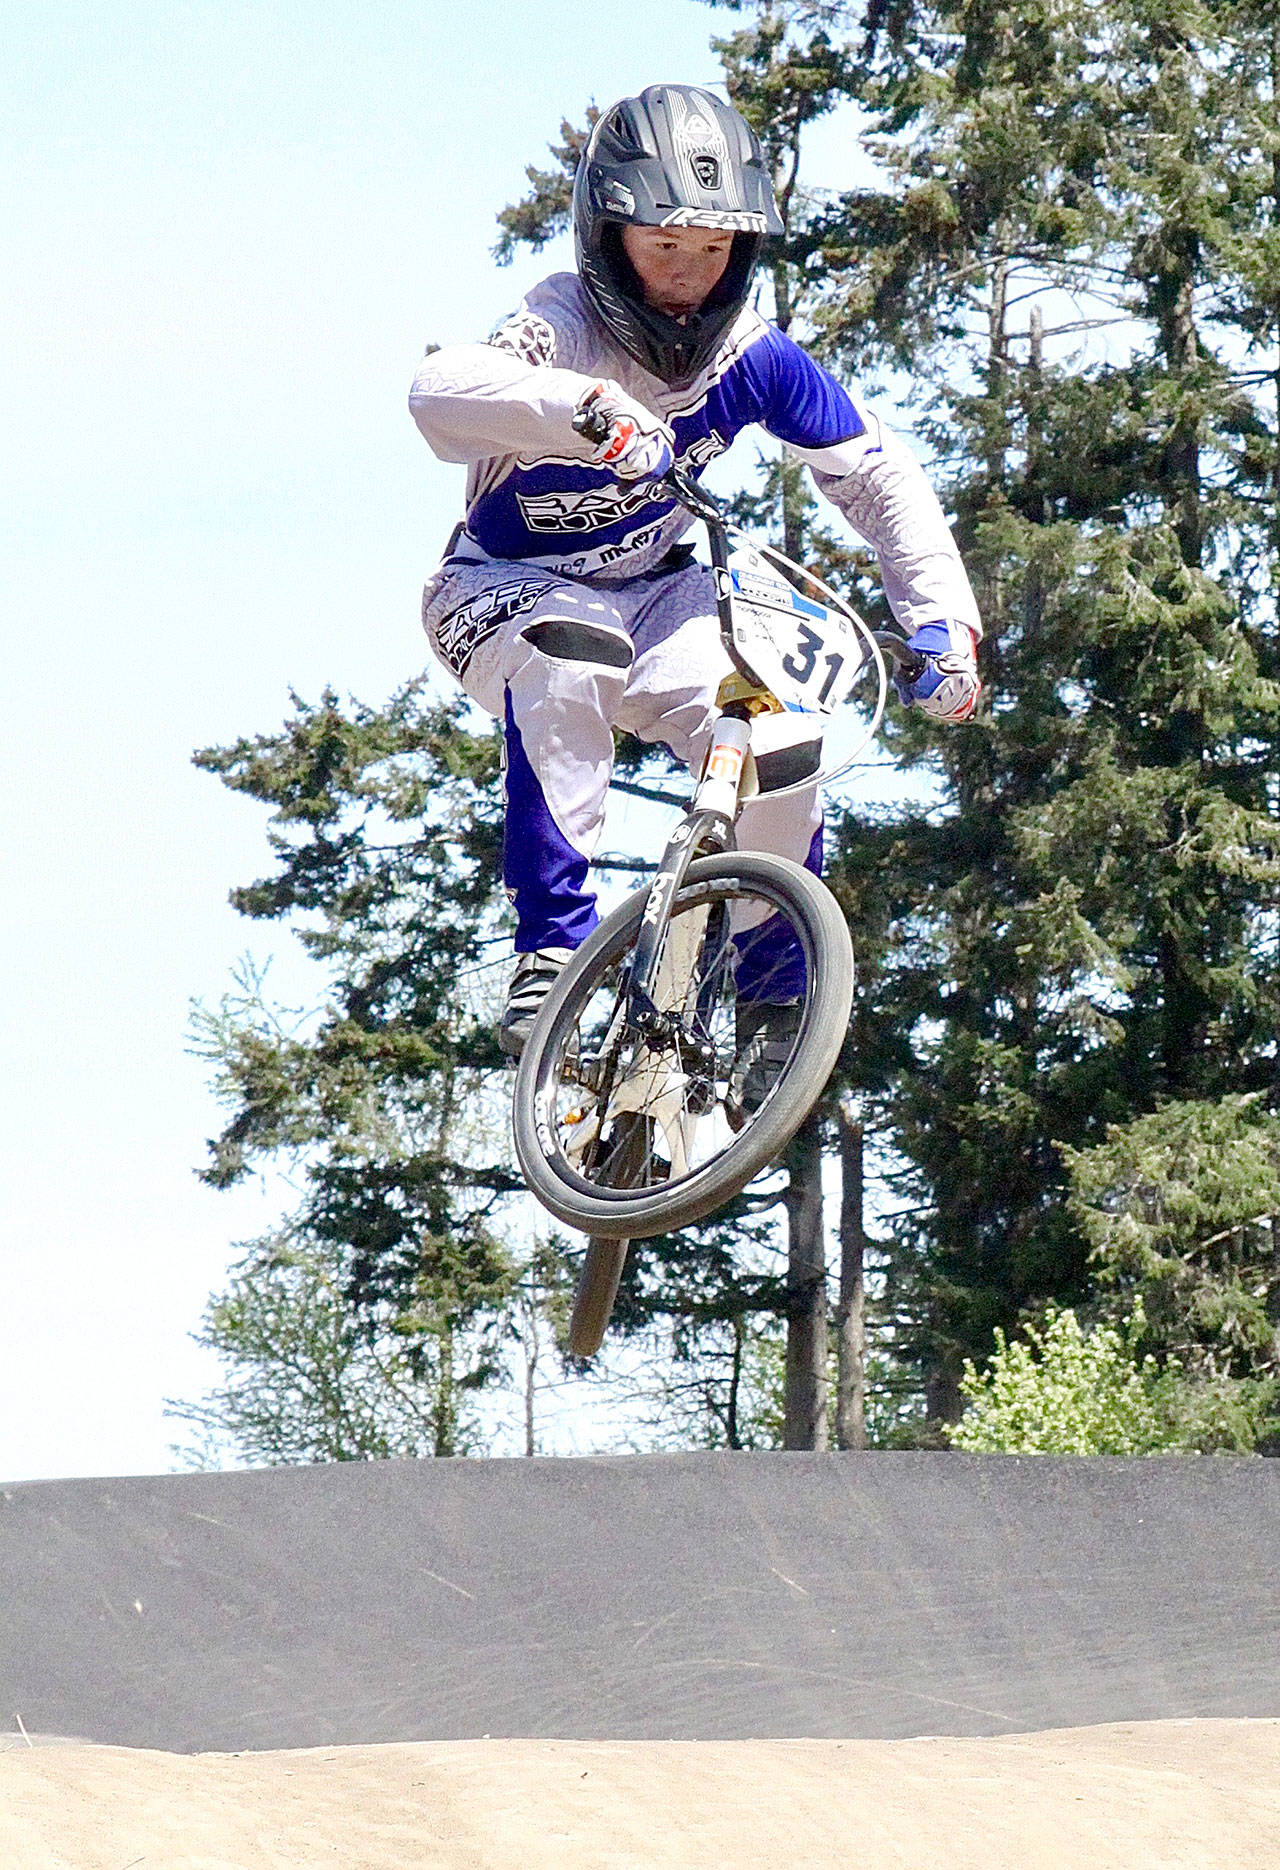 With a newly refurbished track and new fencing and entrance it was fun in the sun for the BMX racers at Lincoln Park on the first day of racing Sunday. Brian Belbin of Port Angeles does an extra twist with his handlebars as flies over the hills at the track. (Dave Logan/for Peninsula Daily News)